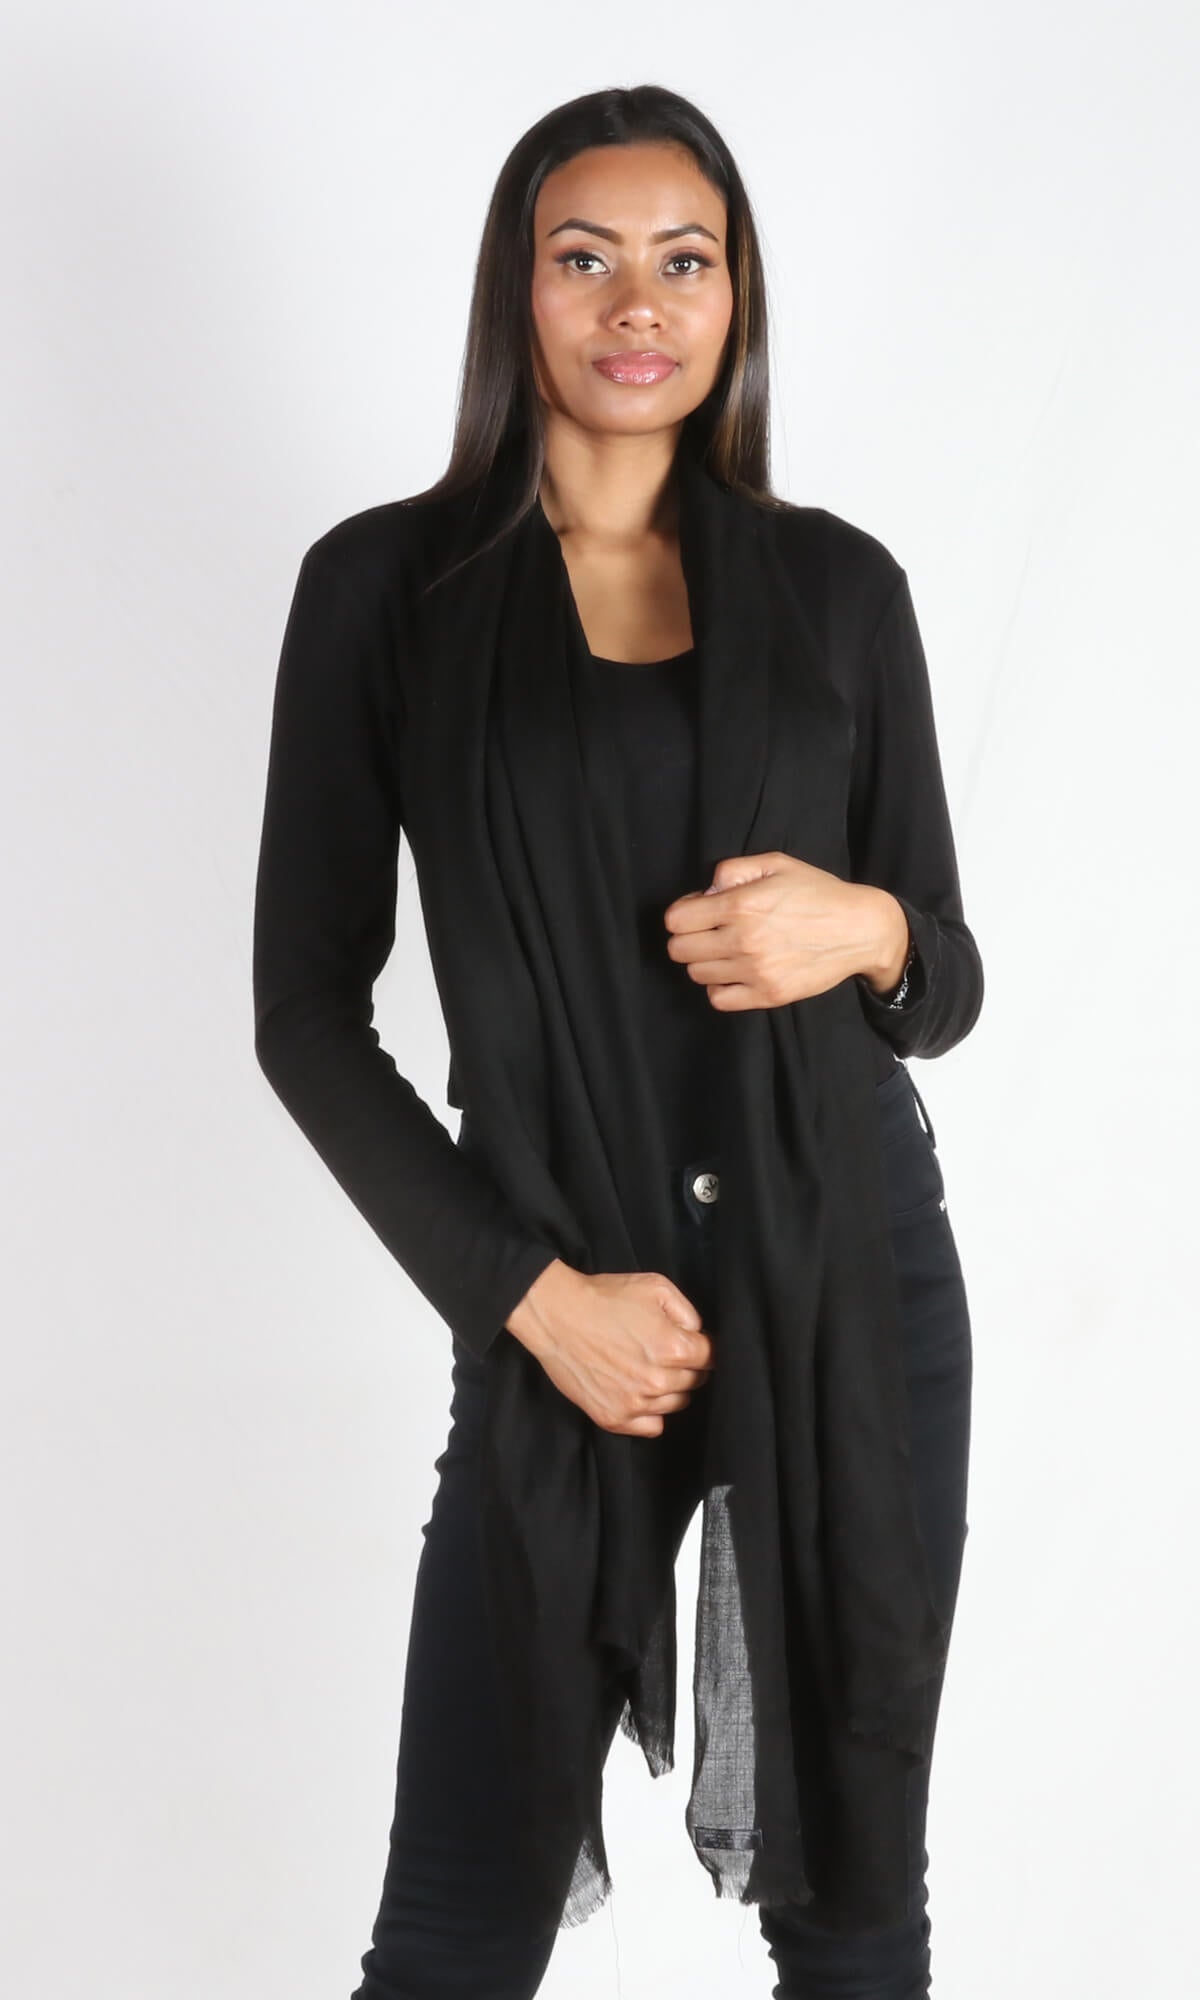 A beautiful 5ft 8 inches tall female model displays a 100% pure handmade black cashmere shawl draped around her neck to convey the message that the shawl has ample length to reach below the knees.